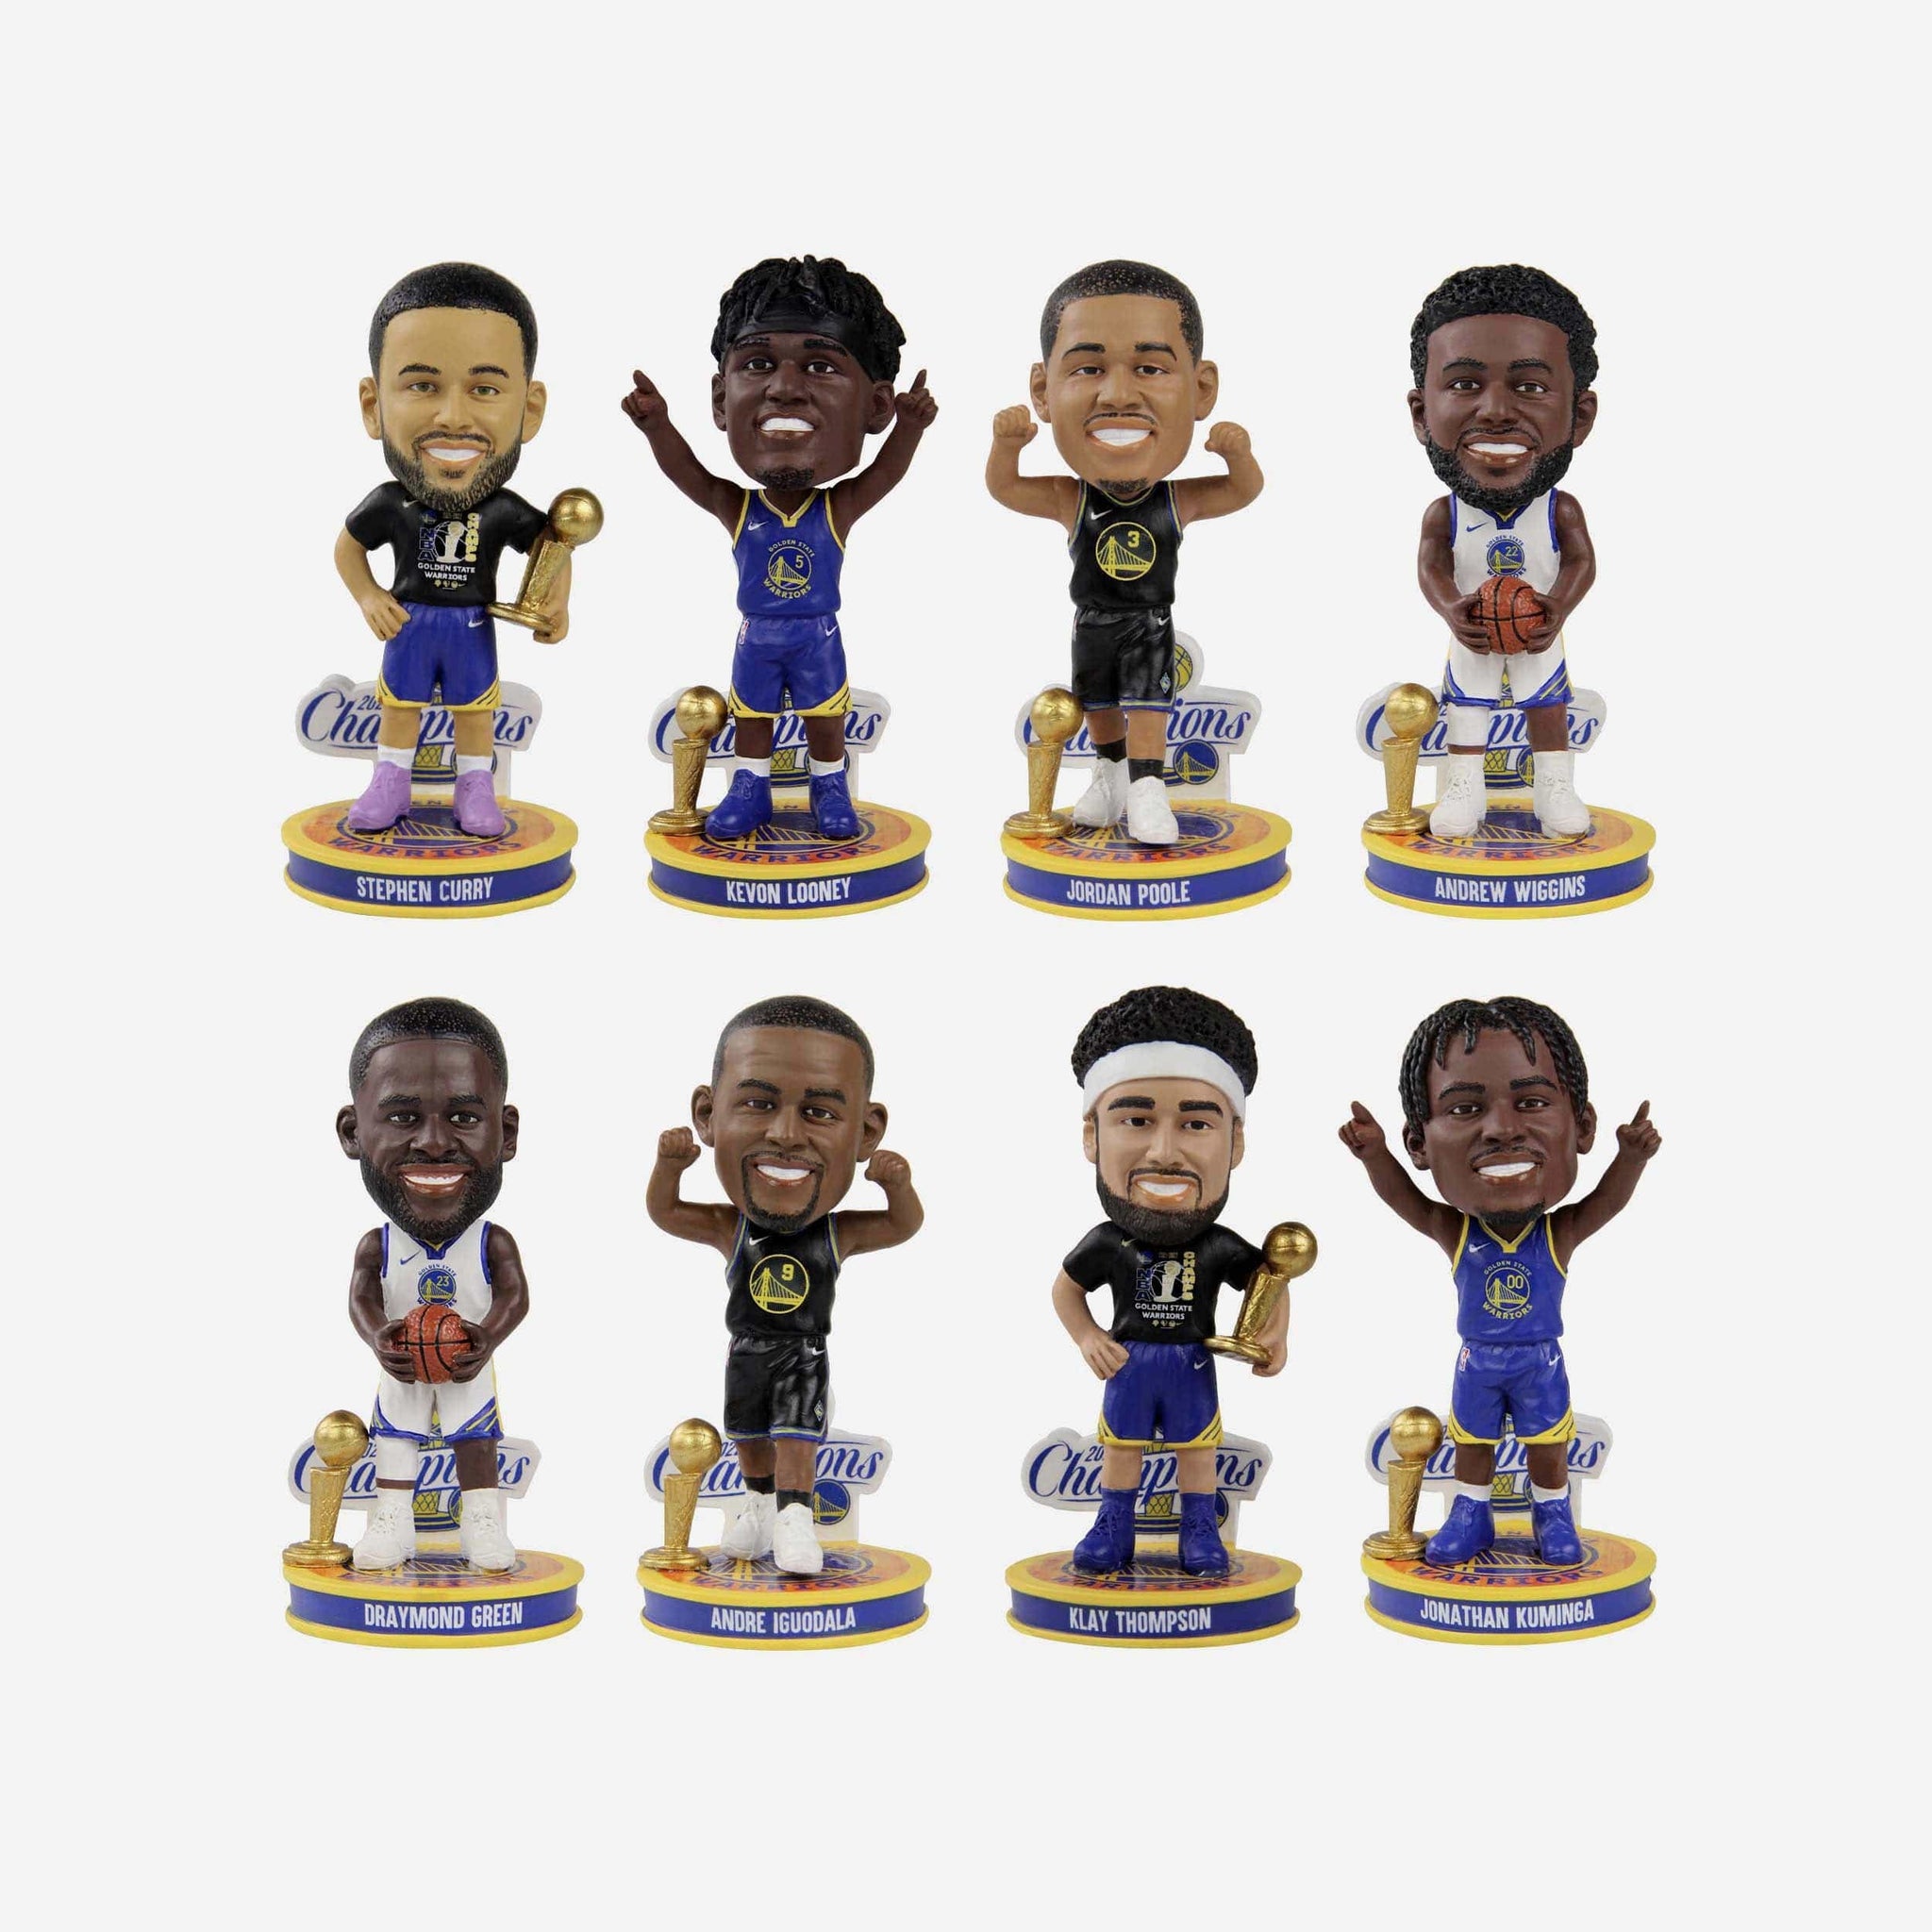 Draymond Green Golden State Warriors 2022 City Jersey Bobblehead Officially Licensed by NBA